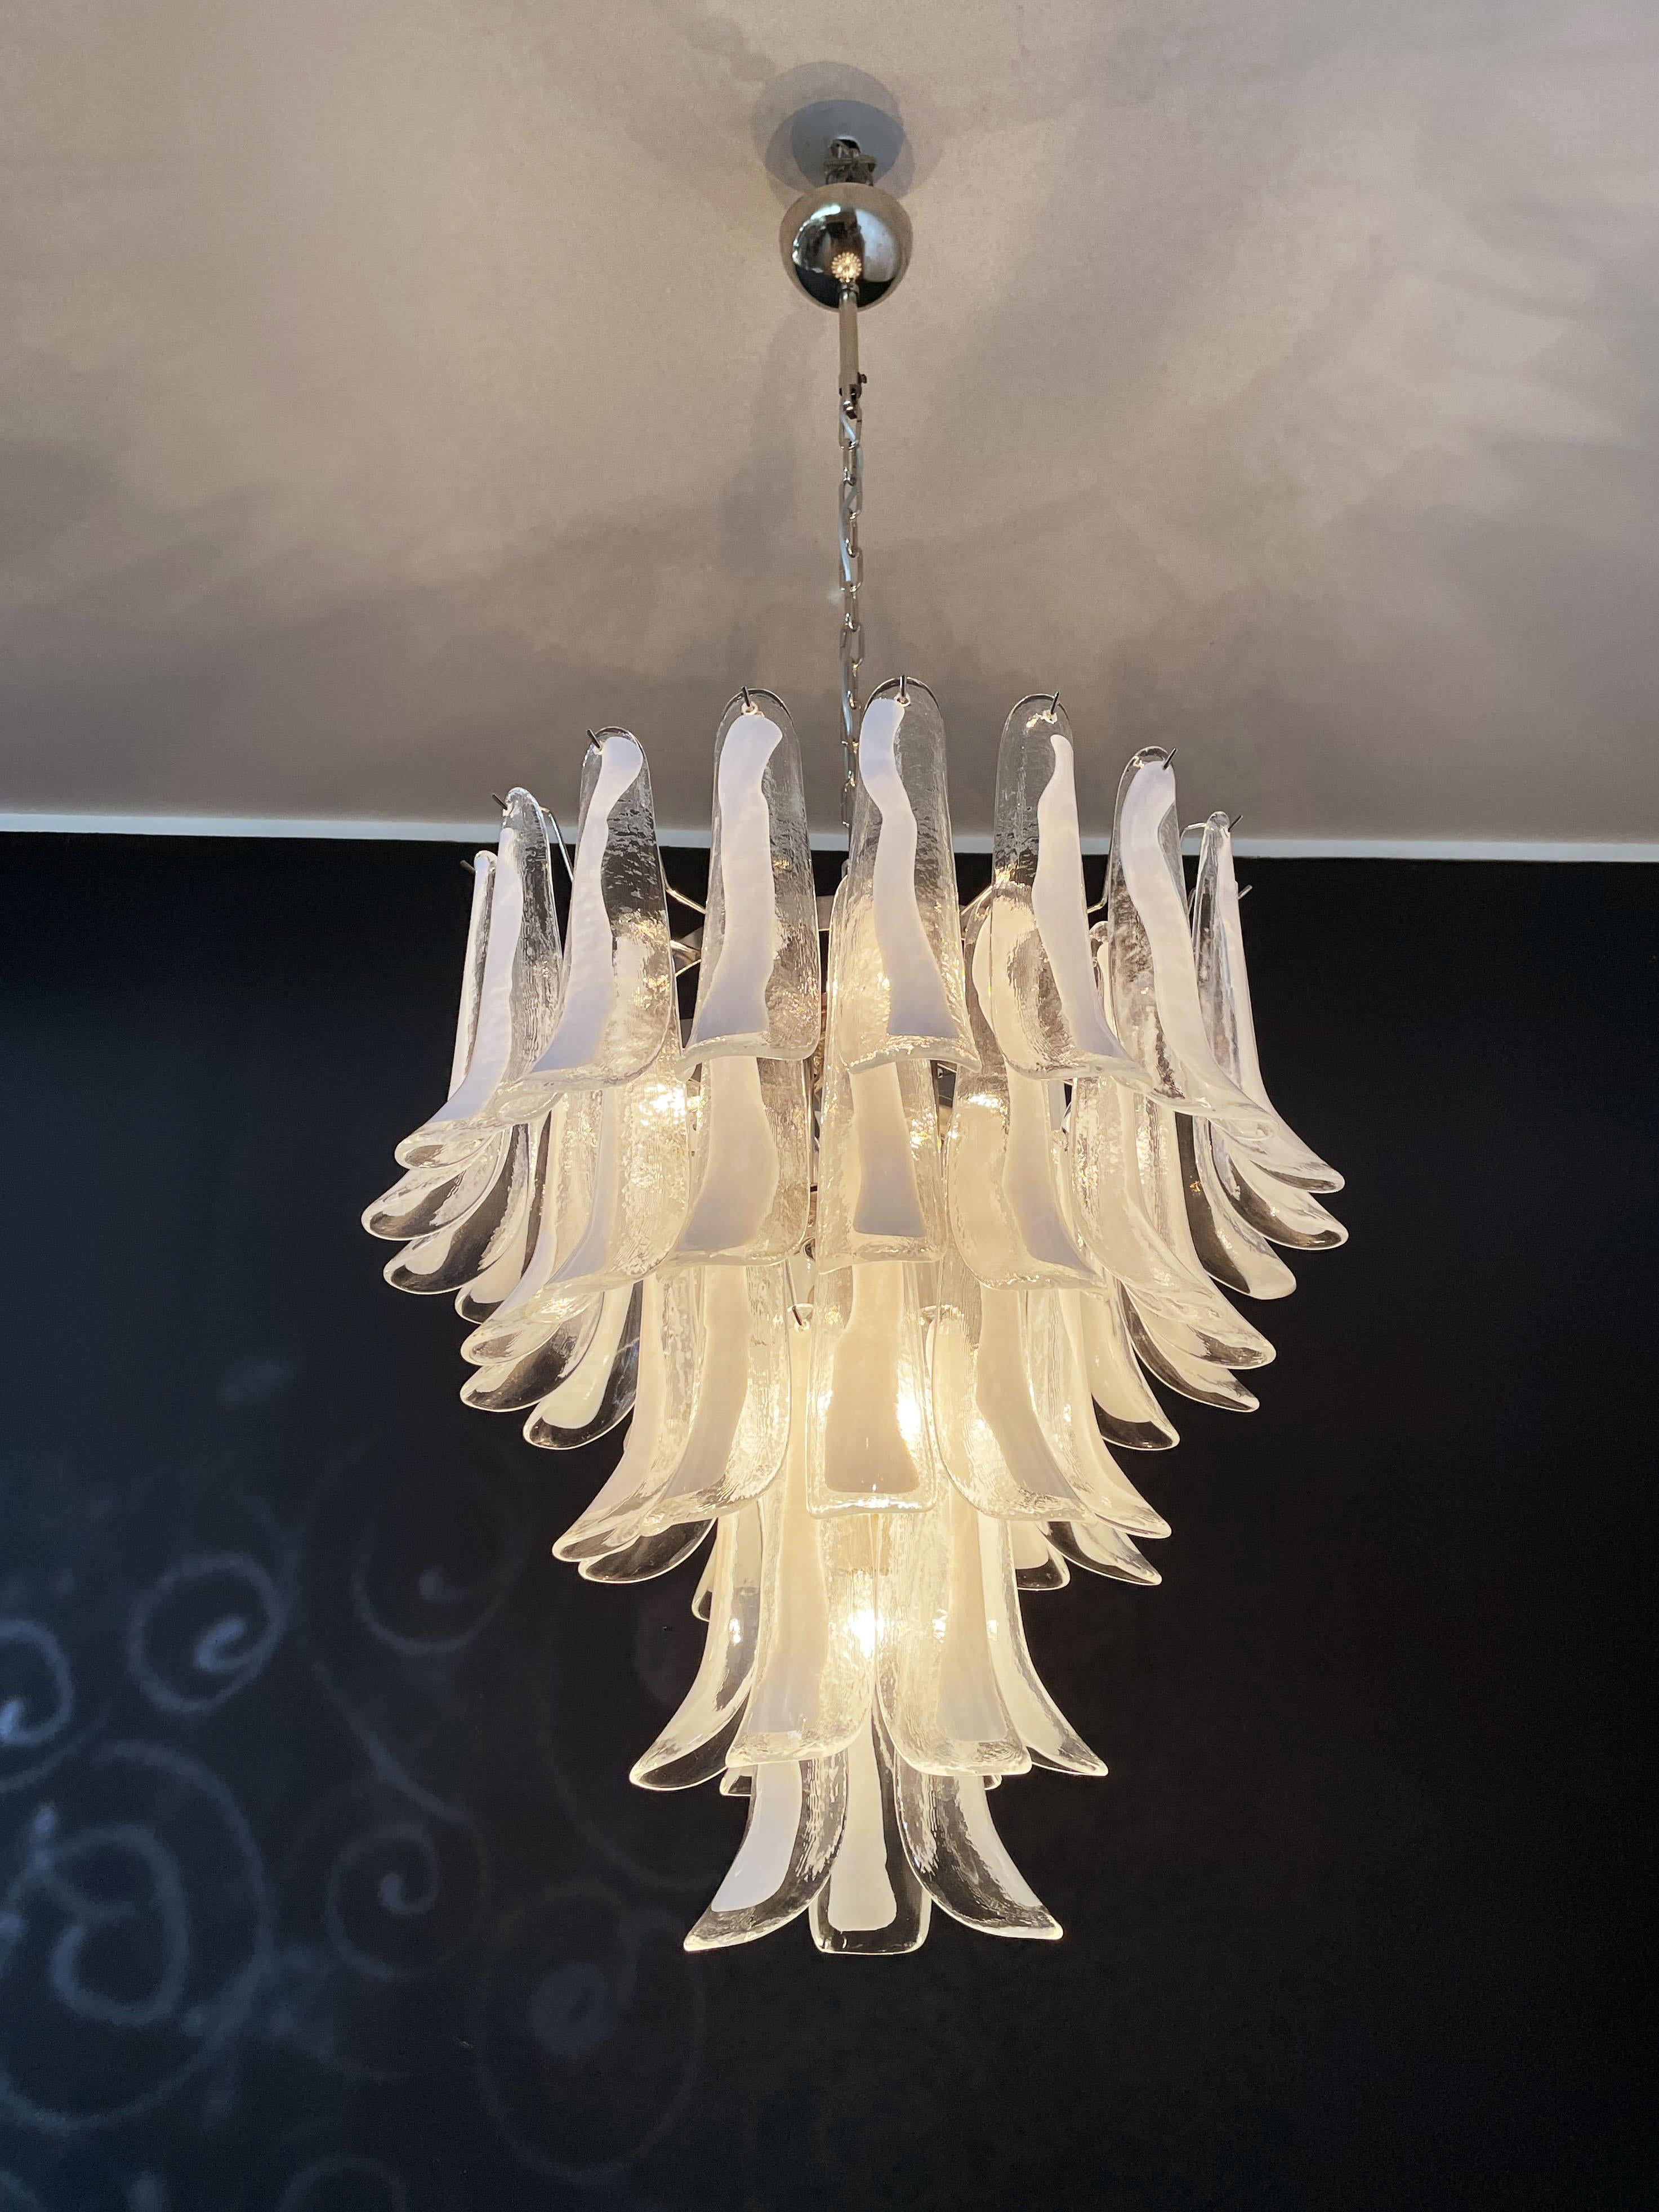 Italian vintage Murano chandelier in the manner of Mazzega - 52 glass petals For Sale 6